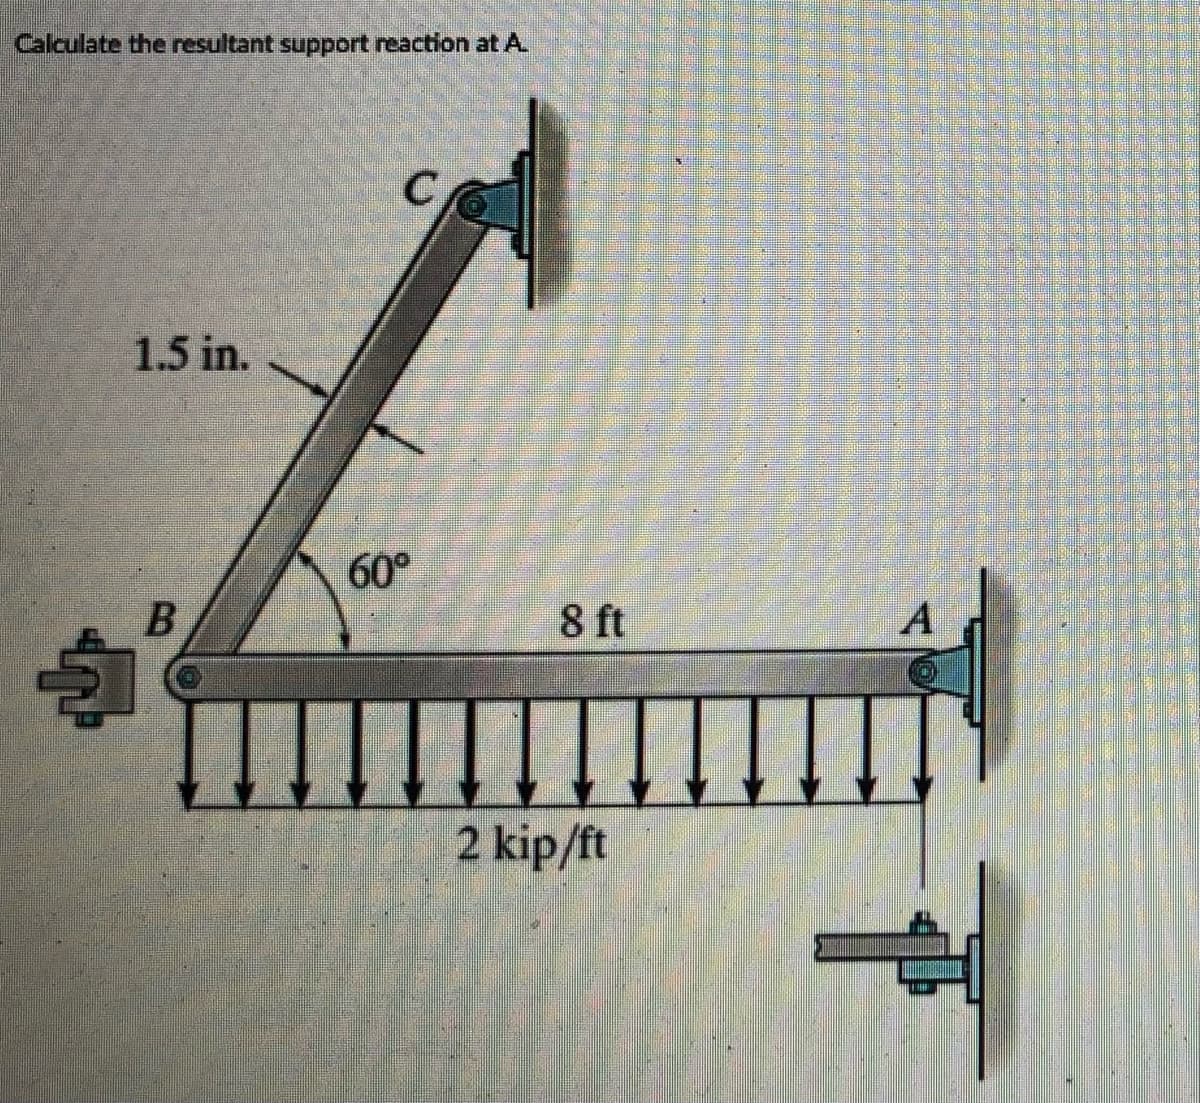 Calculate the resultant support reaction at A.
C
1.5 in.
60°
8 ft
2 kip/ft
